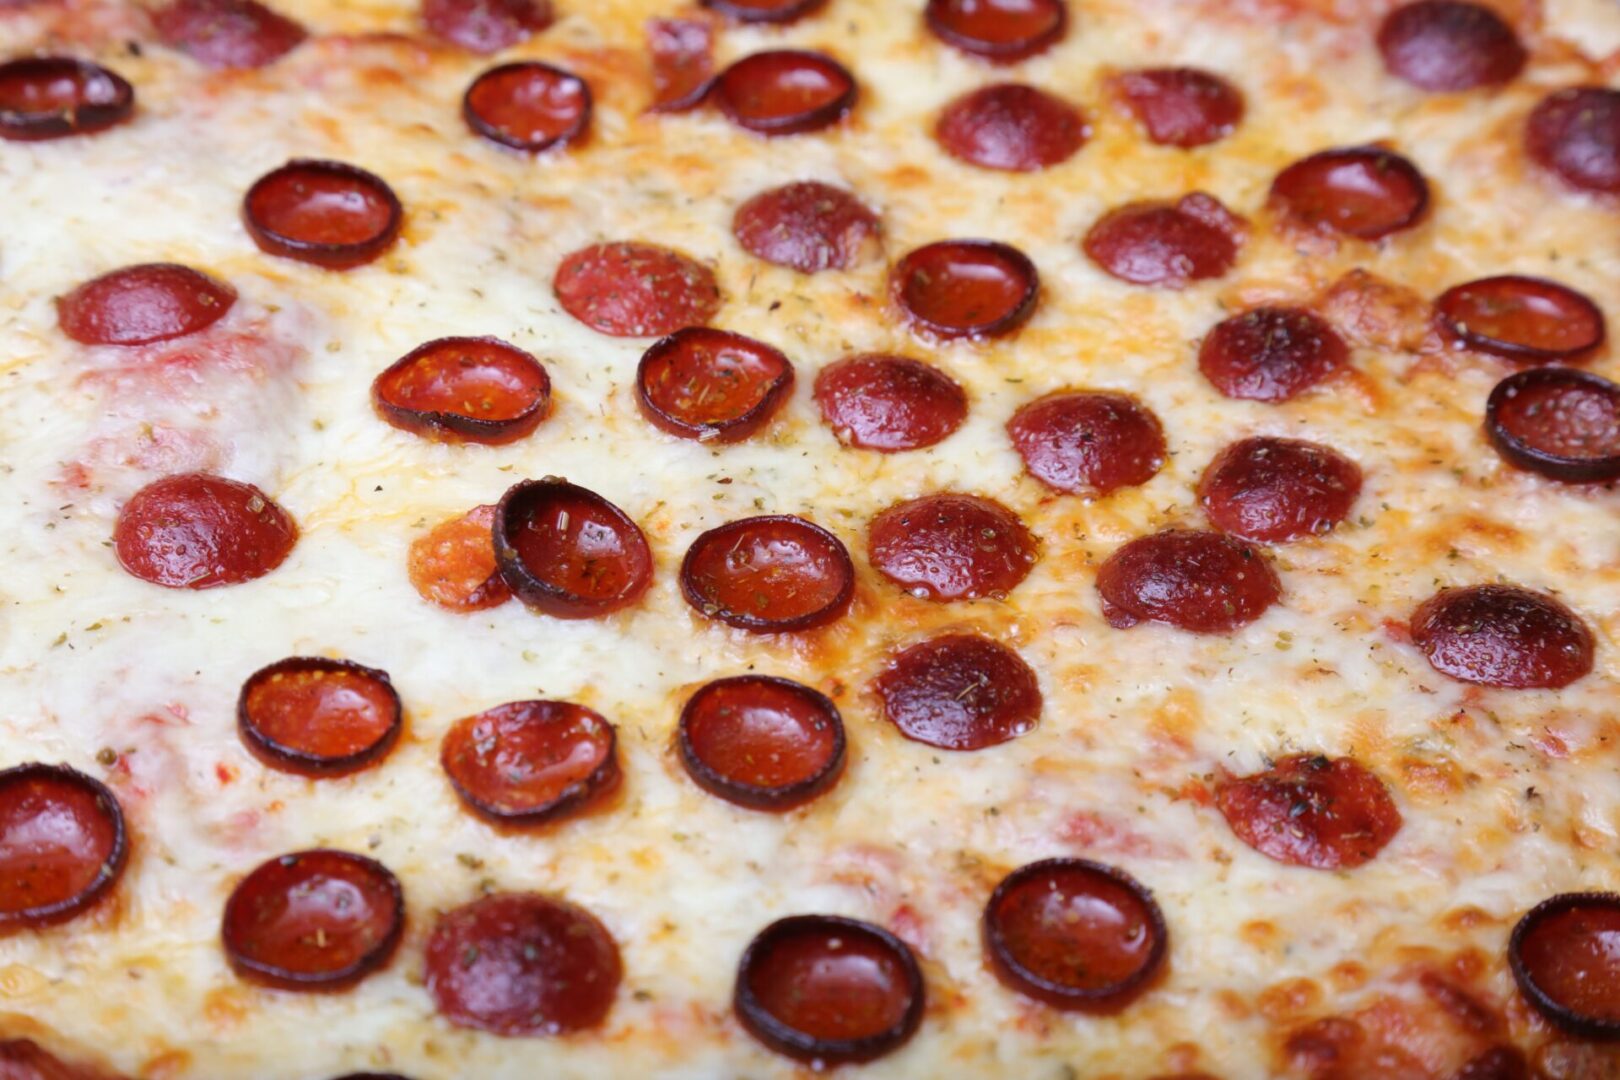 A pepperoni pizza with many pieces of it.